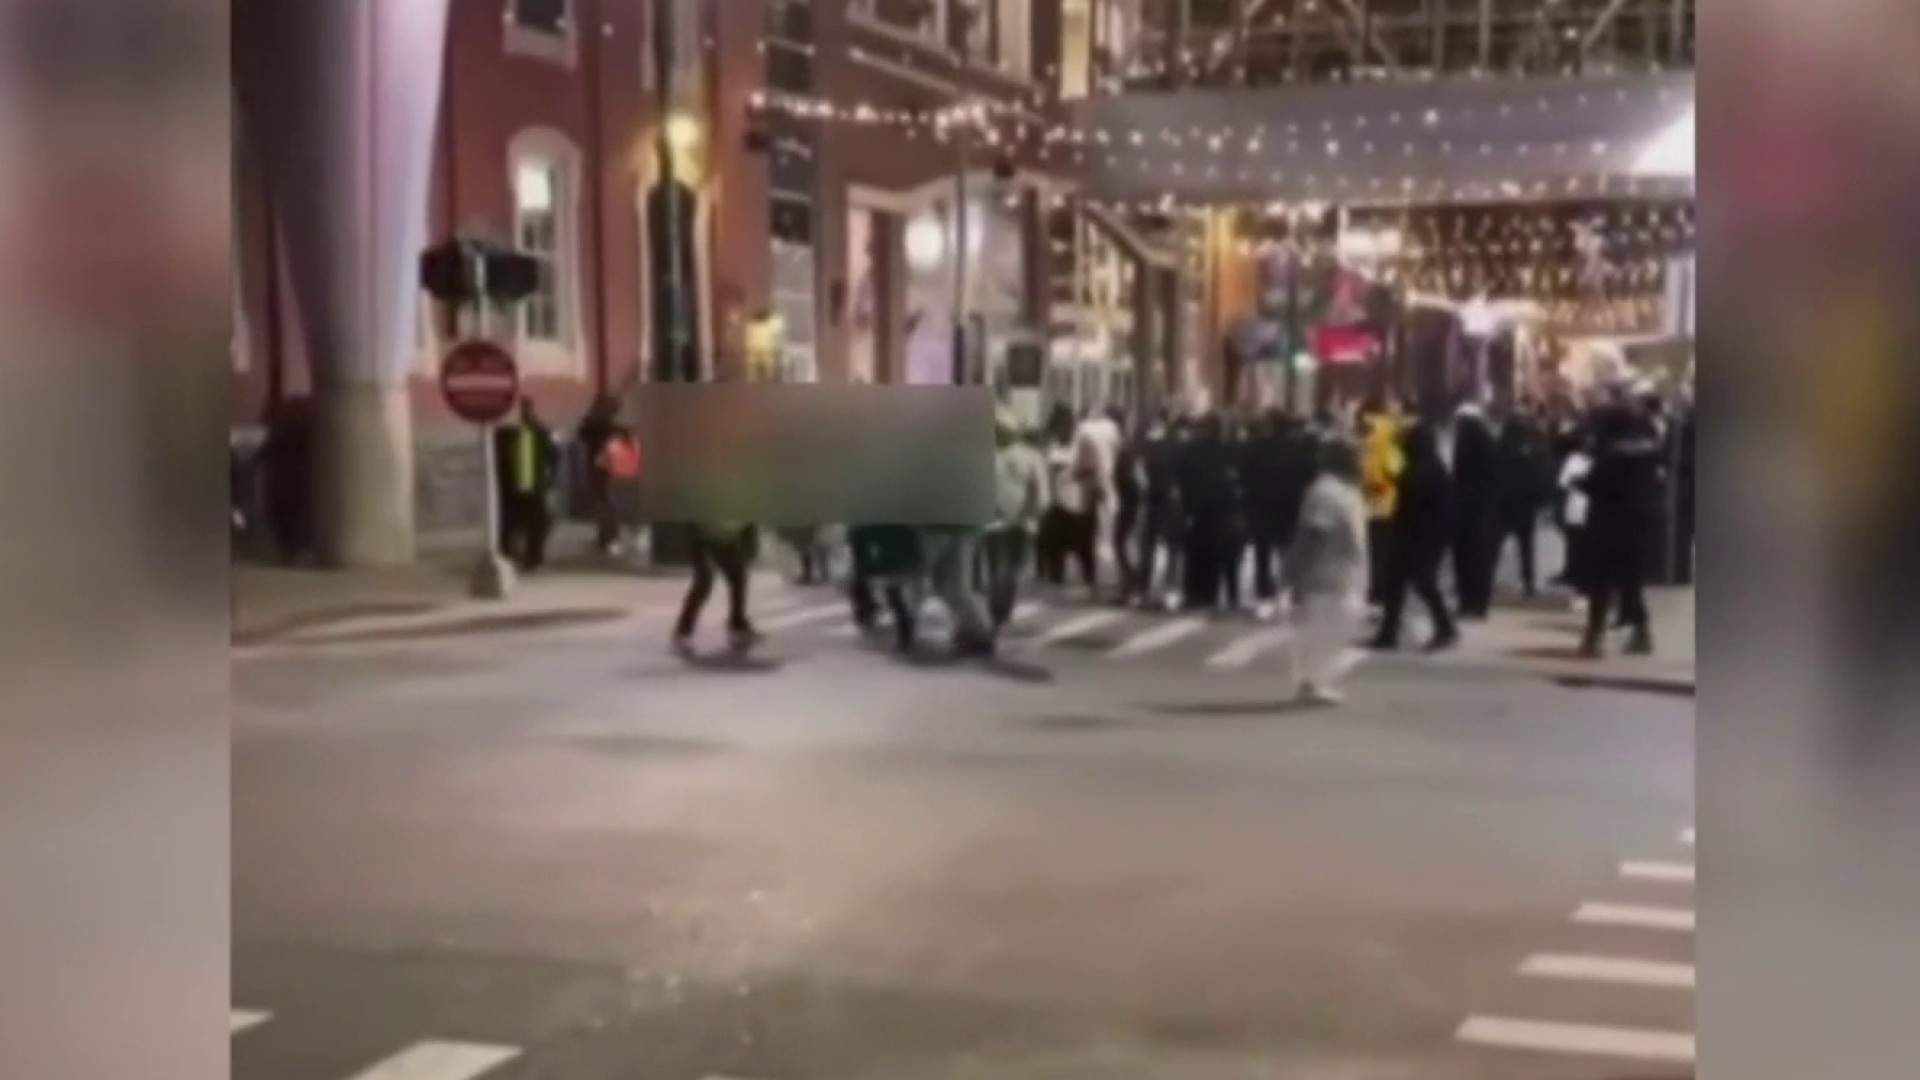 Nightside Report March 18, 2021: 2 people stabbed in large St. Patrick’s Day crowd in Greektown, First look at how Ford Field mass vaccination site plans are going